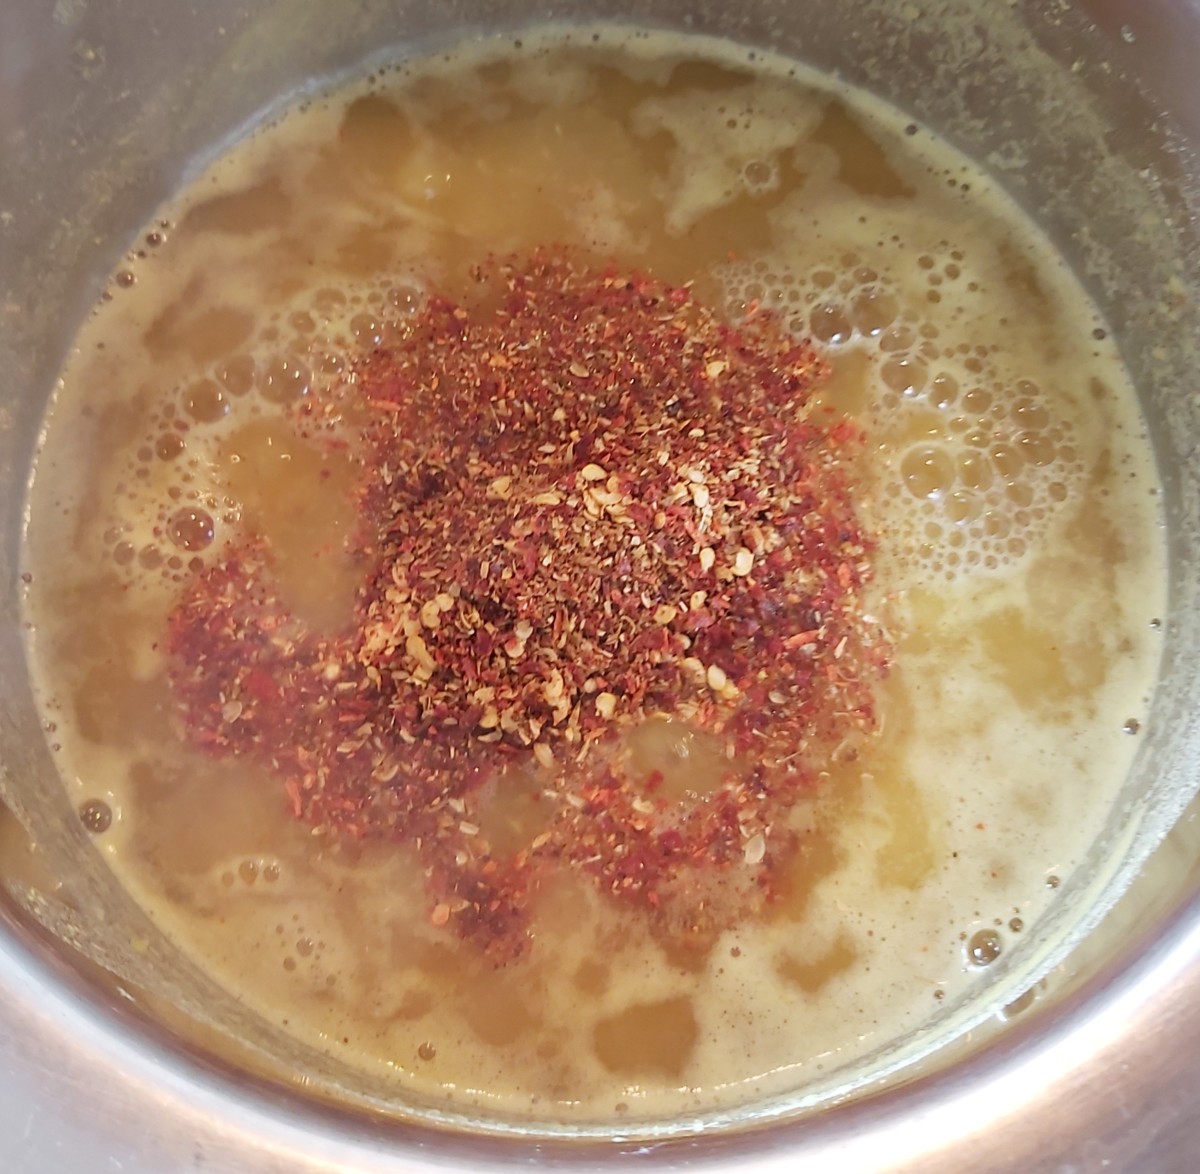 Add the prepared rasam powder (if you prepared a large quantity, just add about 2 to 3 teaspoons). Mix well.